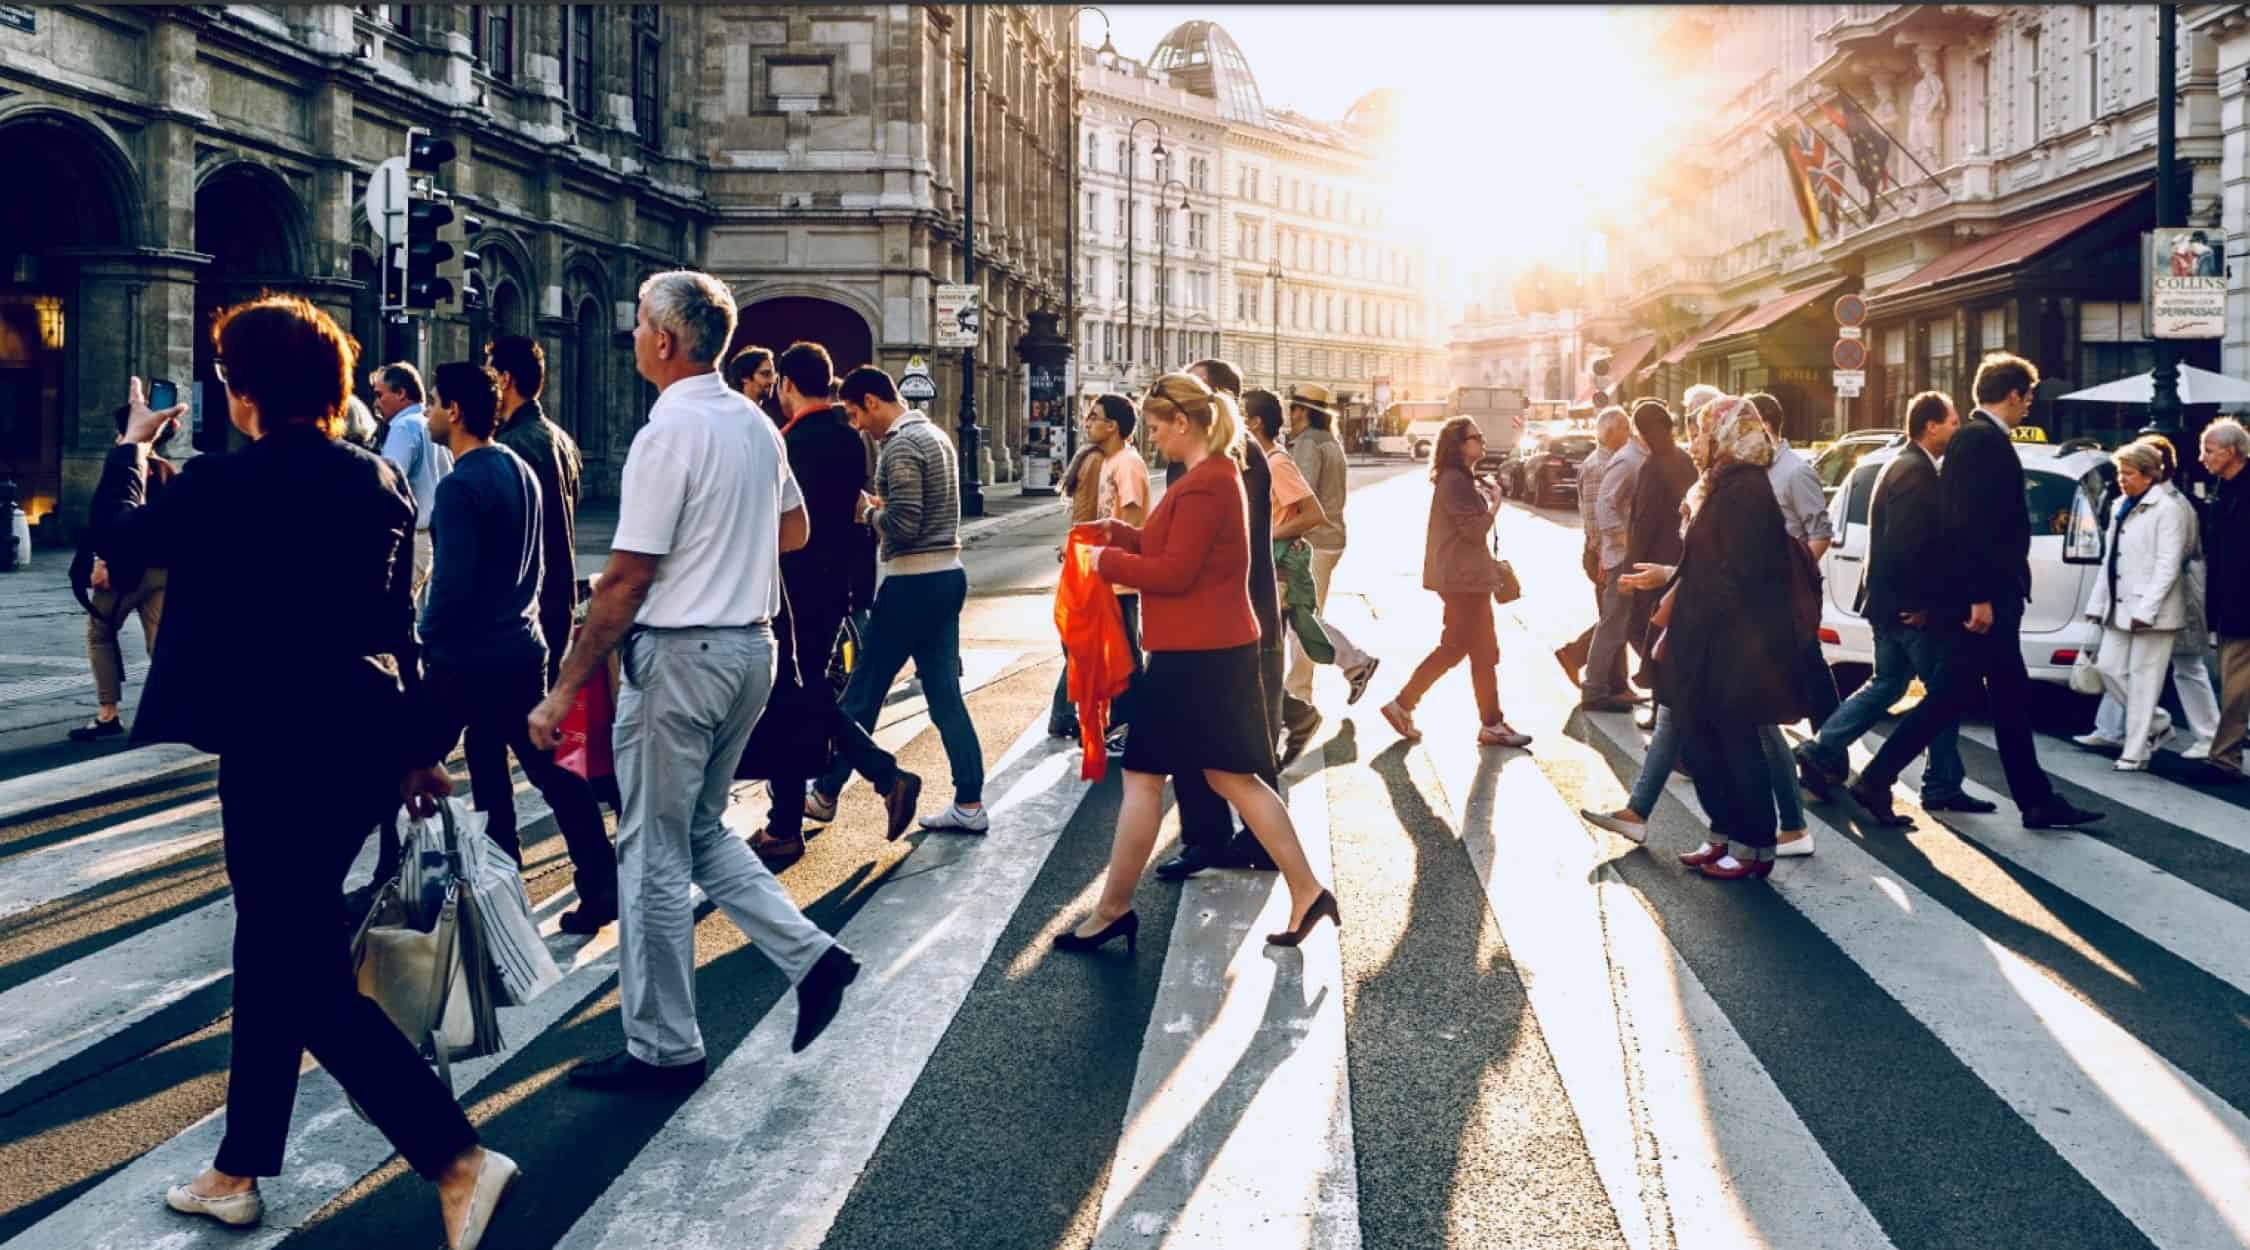 Stock image of people crossing a street